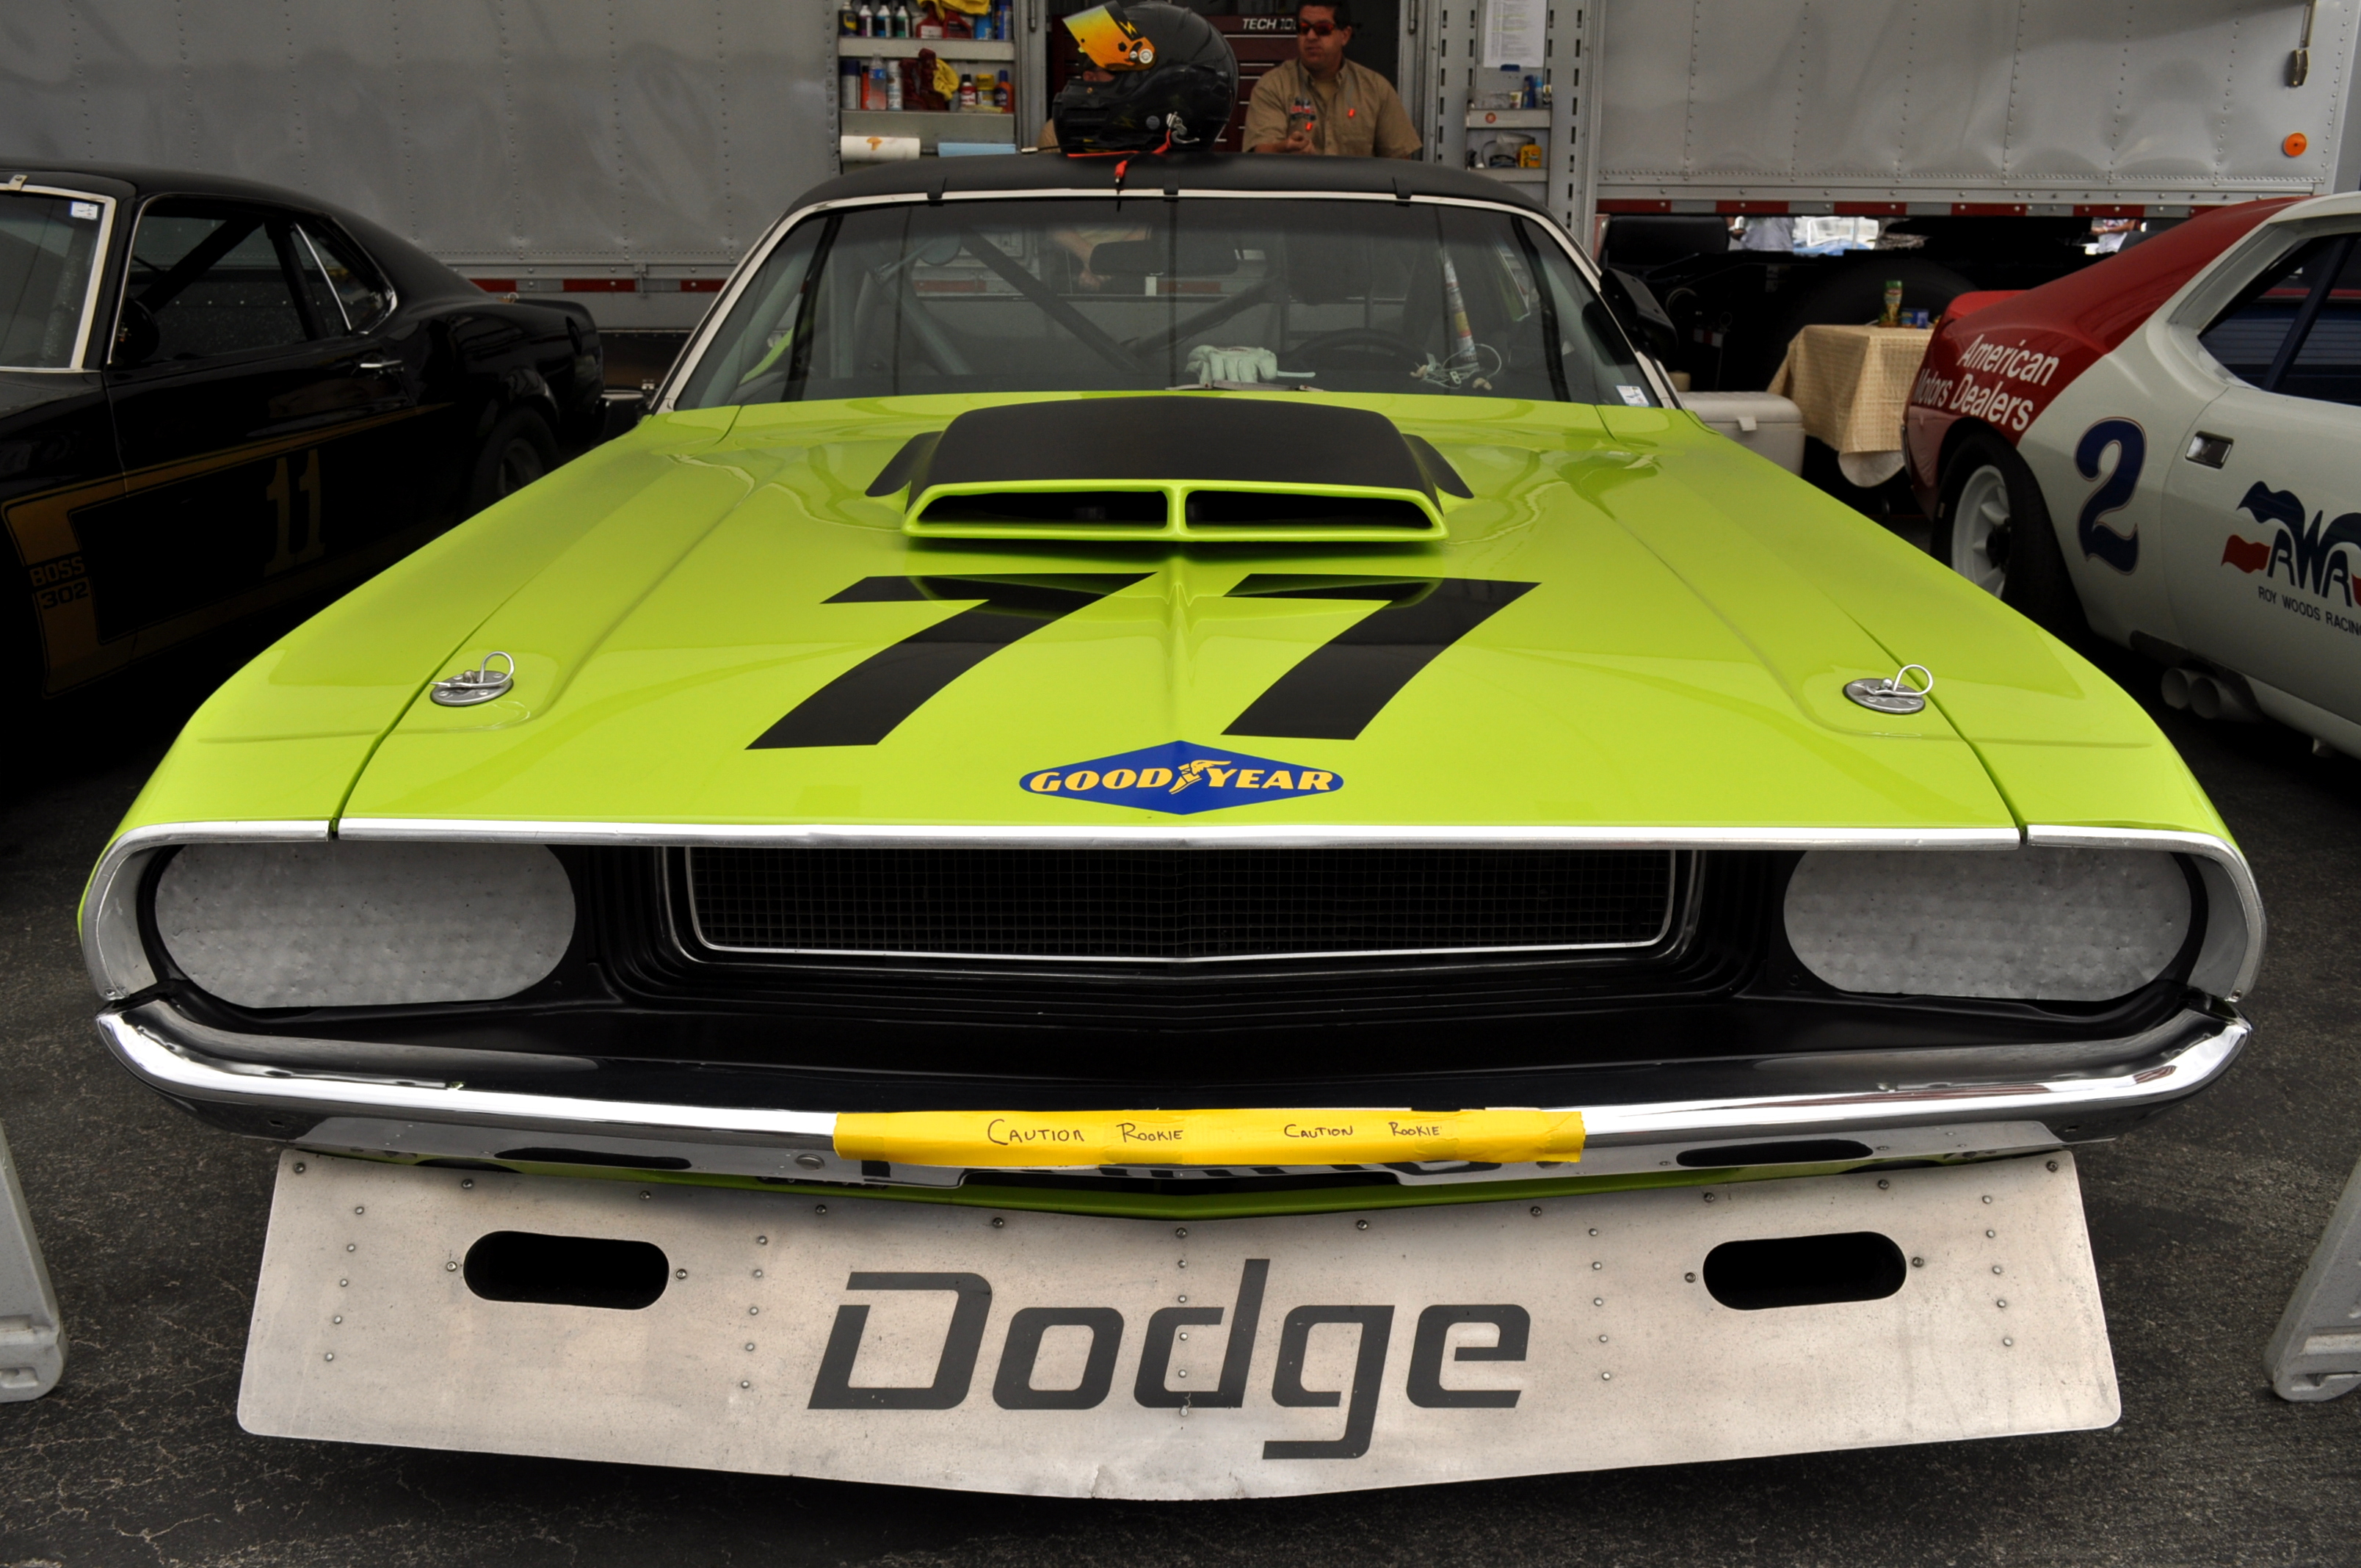 1970 TRANS-AM Dodge Challenger coupe | Flickr - Photo Sharing!